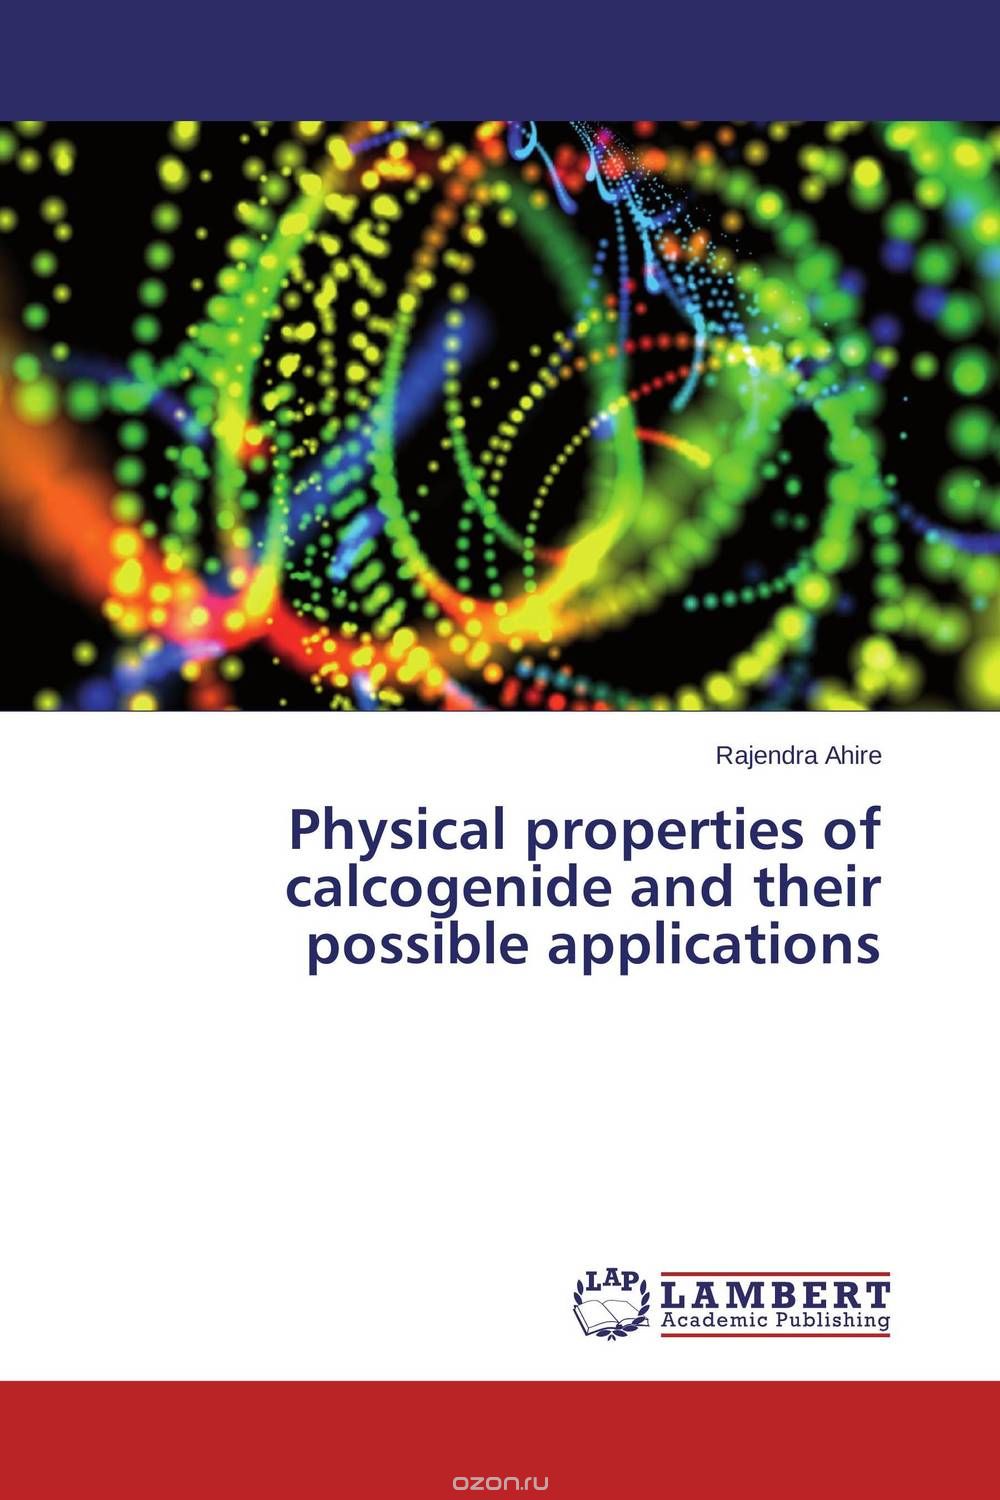 Скачать книгу "Physical properties of calcogenide and their possible applications"